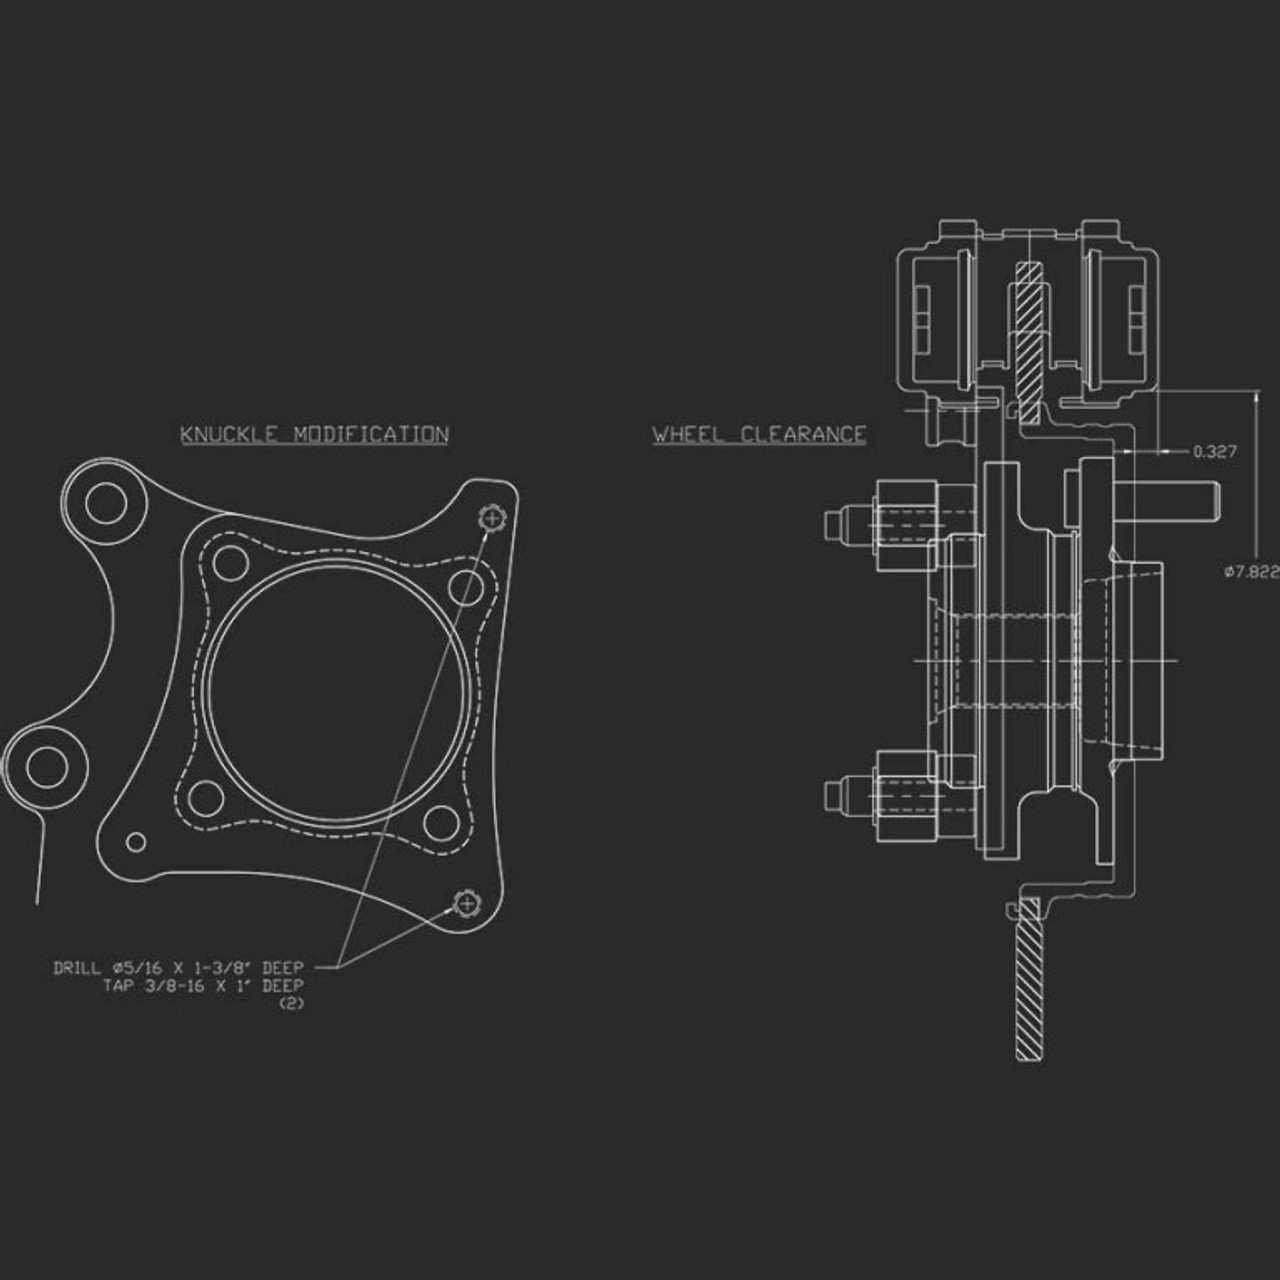 Strange S550 Mustang Knuckle Modification Instructions